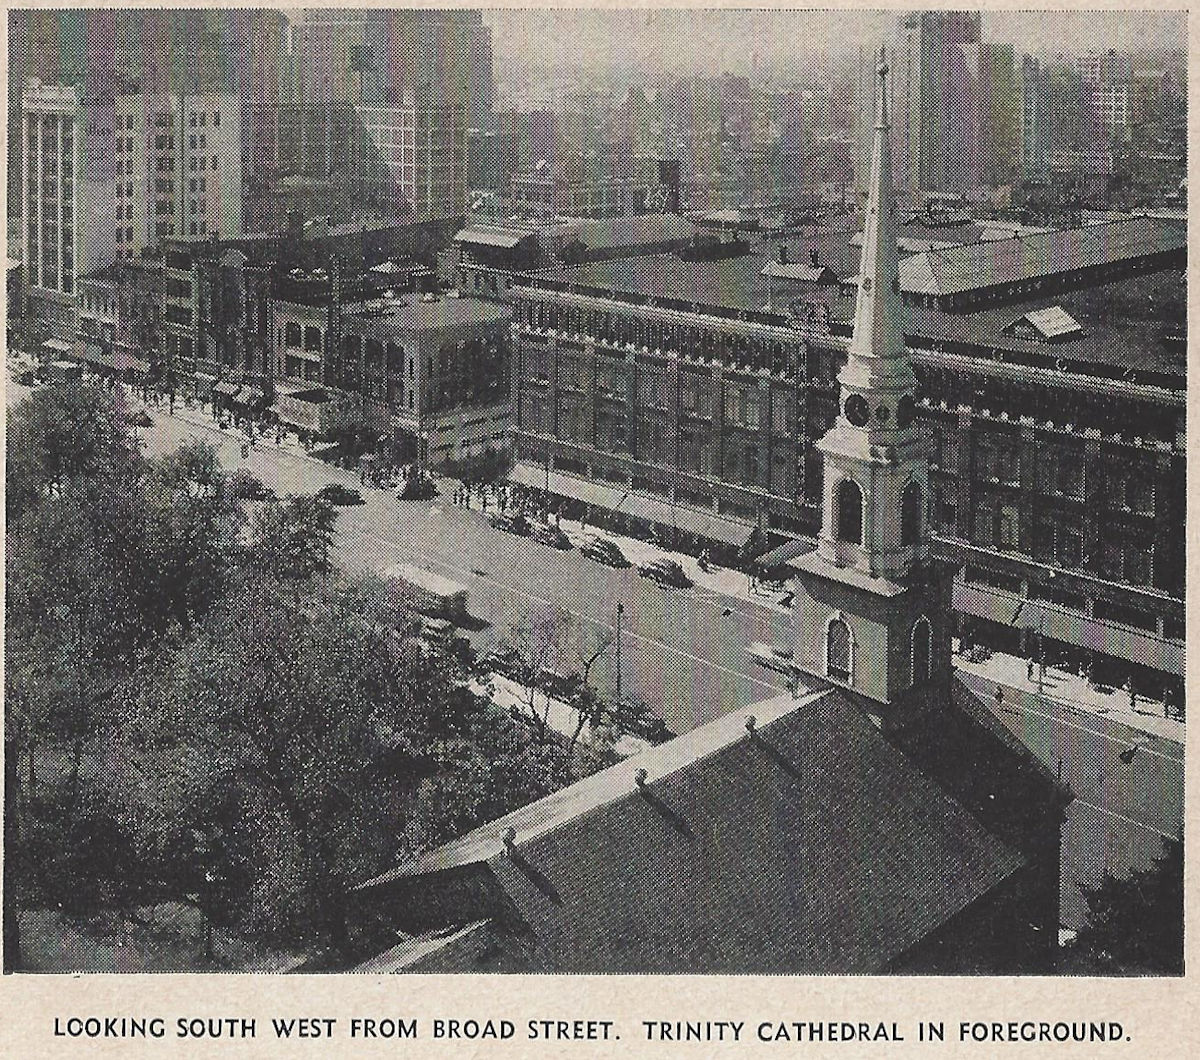 635-677 Broad Street
Image from "Newark, City of Opportunity"
